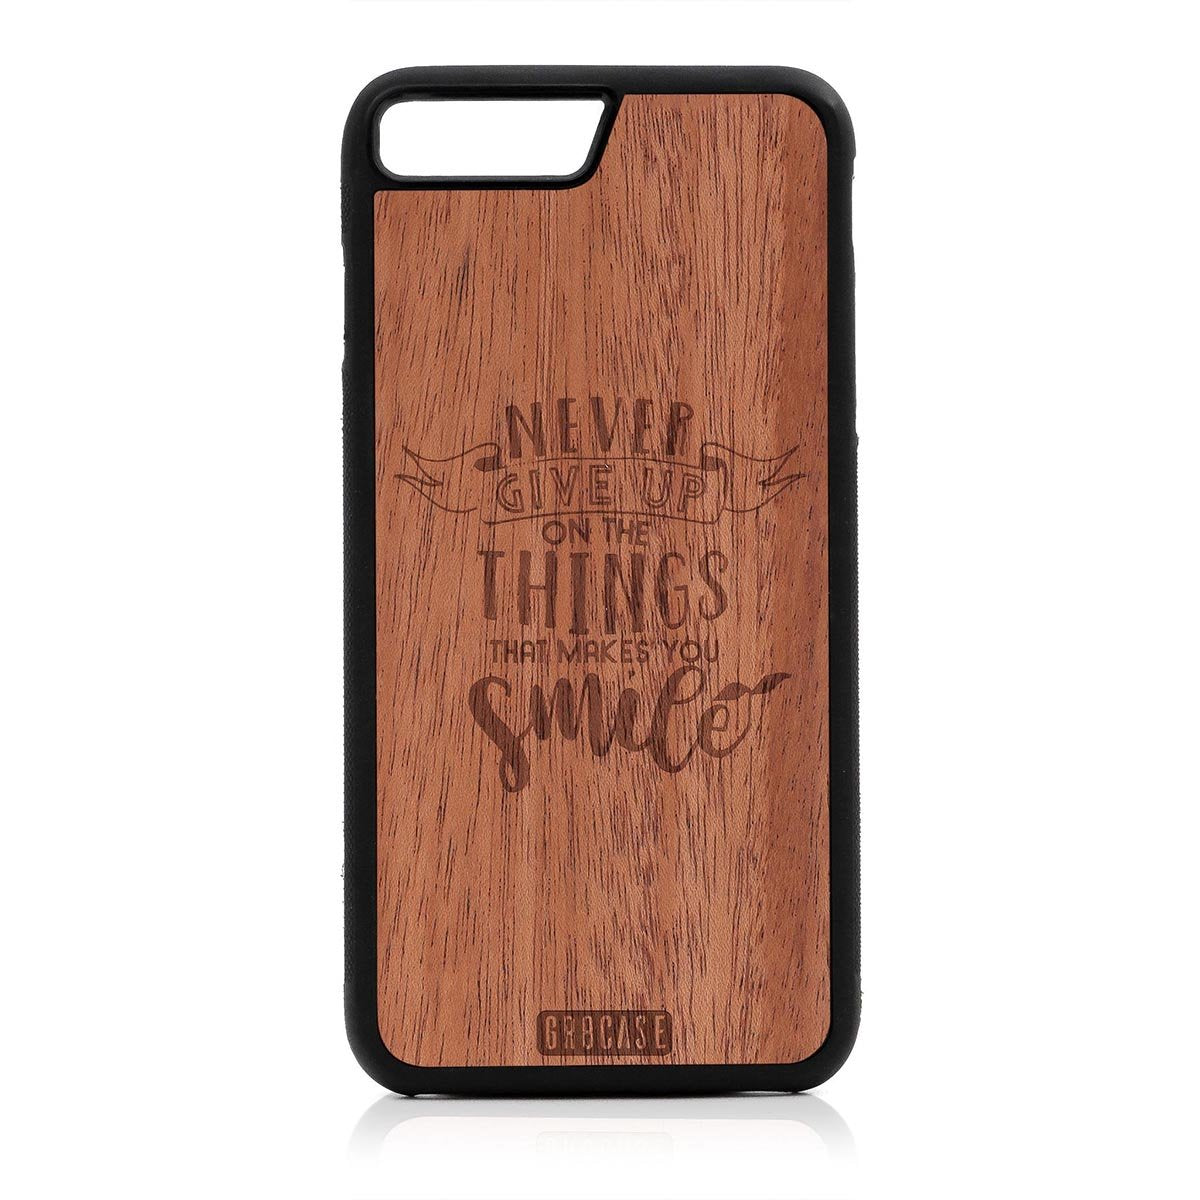 Never Give Up On The Things That Makes You Smile Design Wood Case For iPhone SE 2020 by GR8CASE